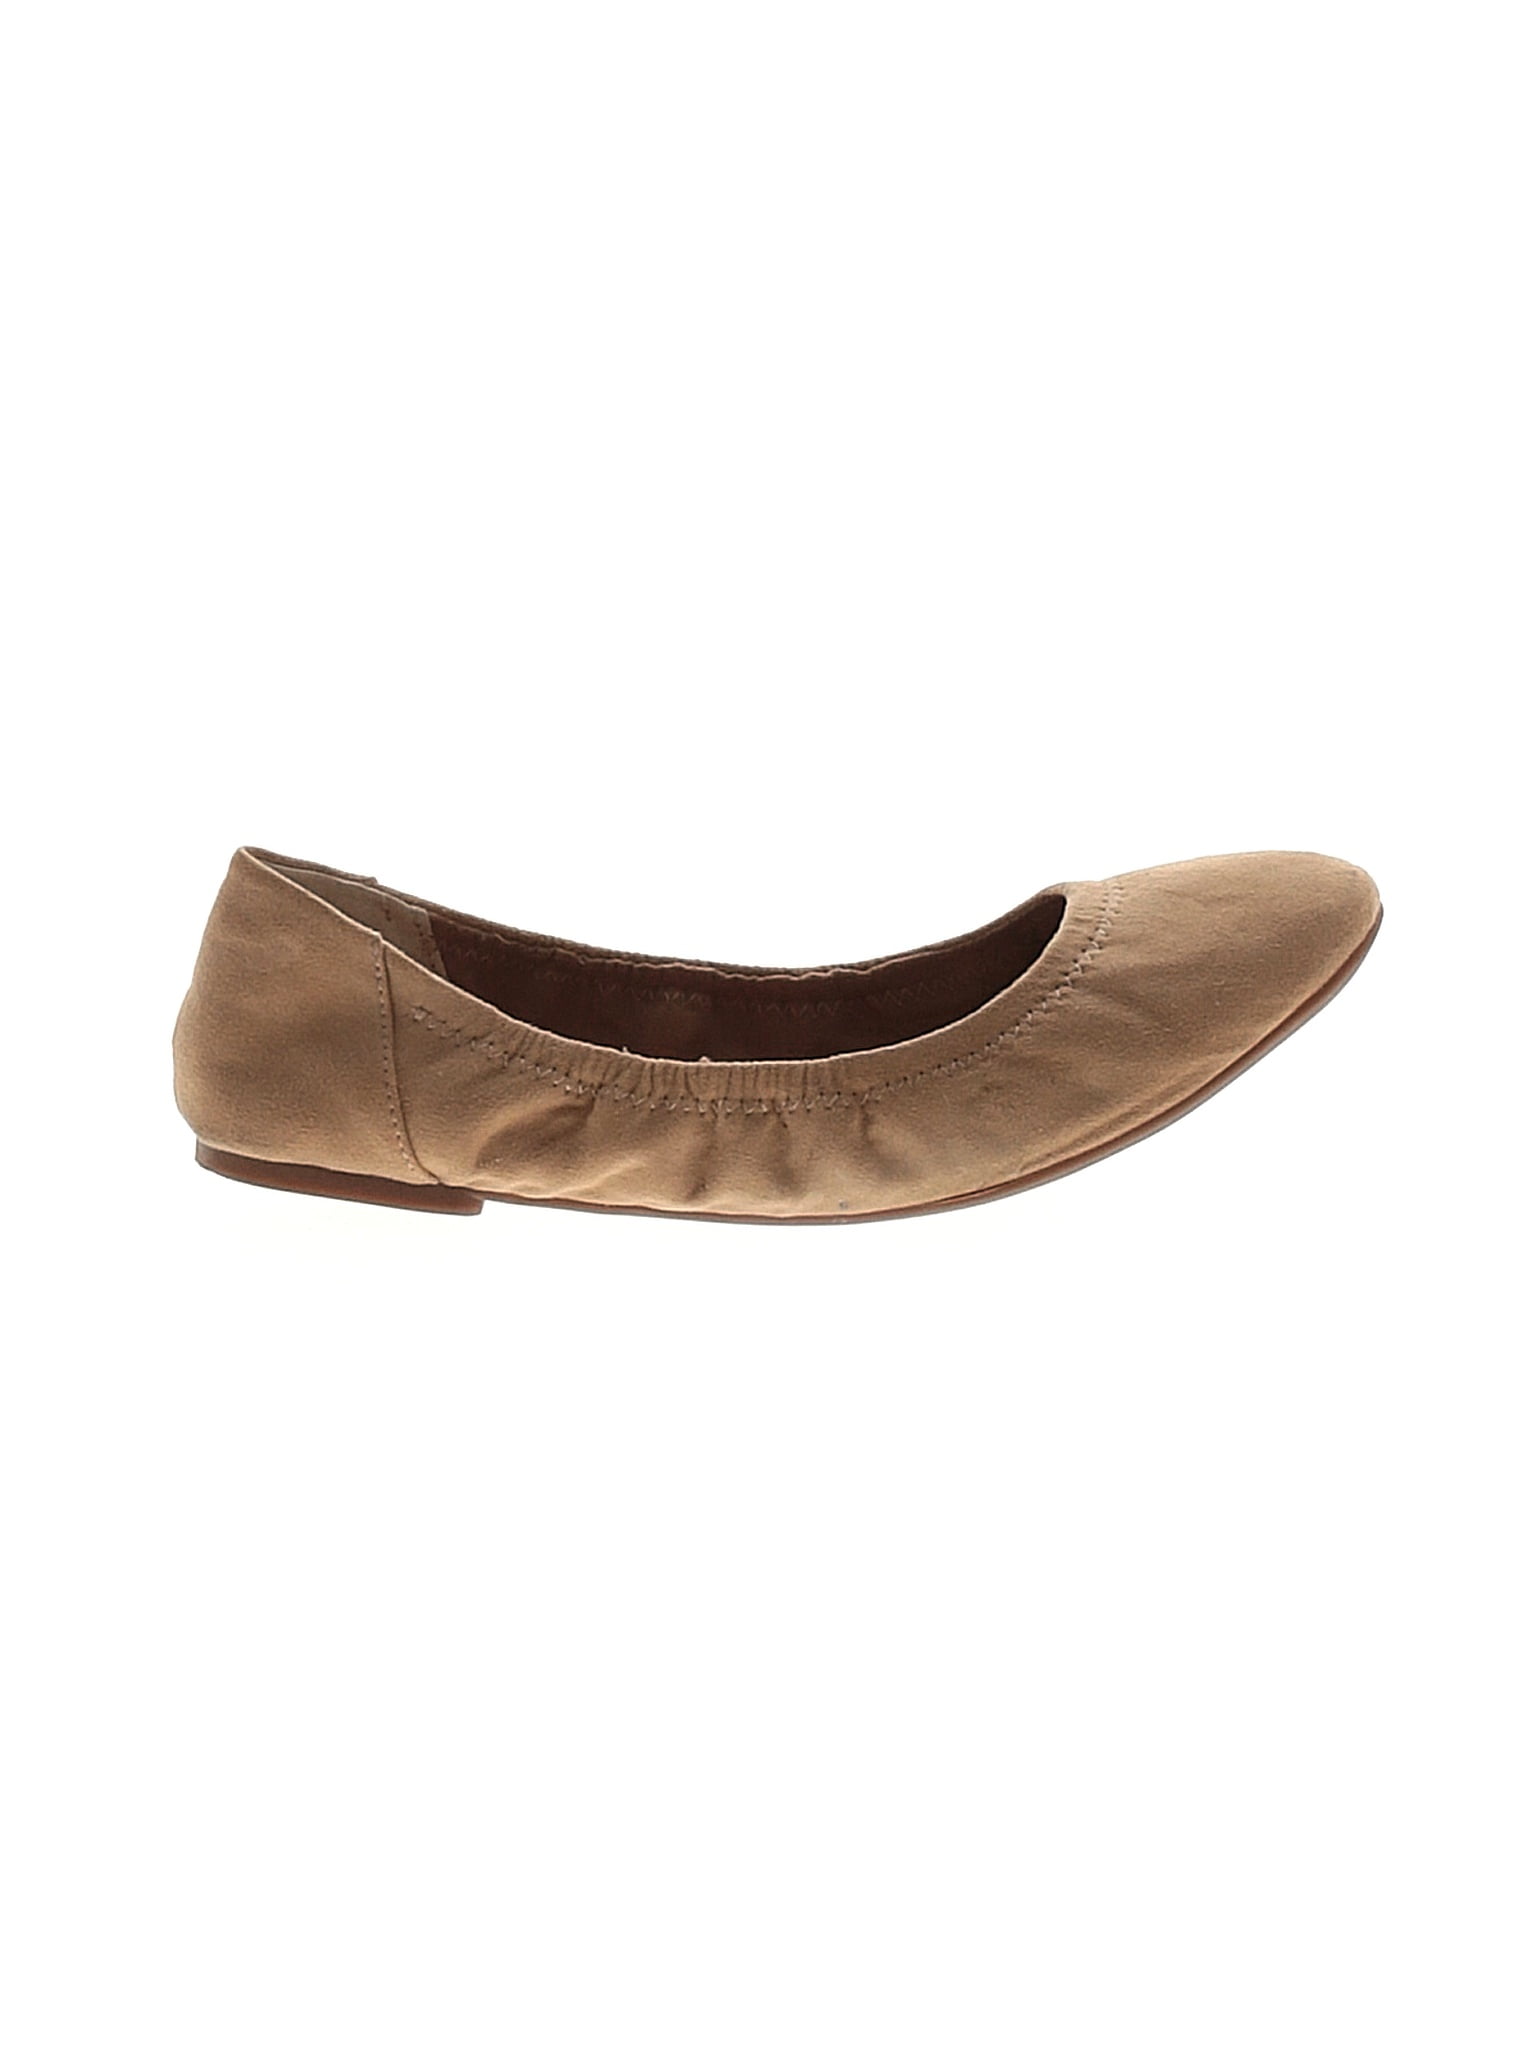 Riverberry Solid Brown Wedges Size 8 1/2 - 43% off